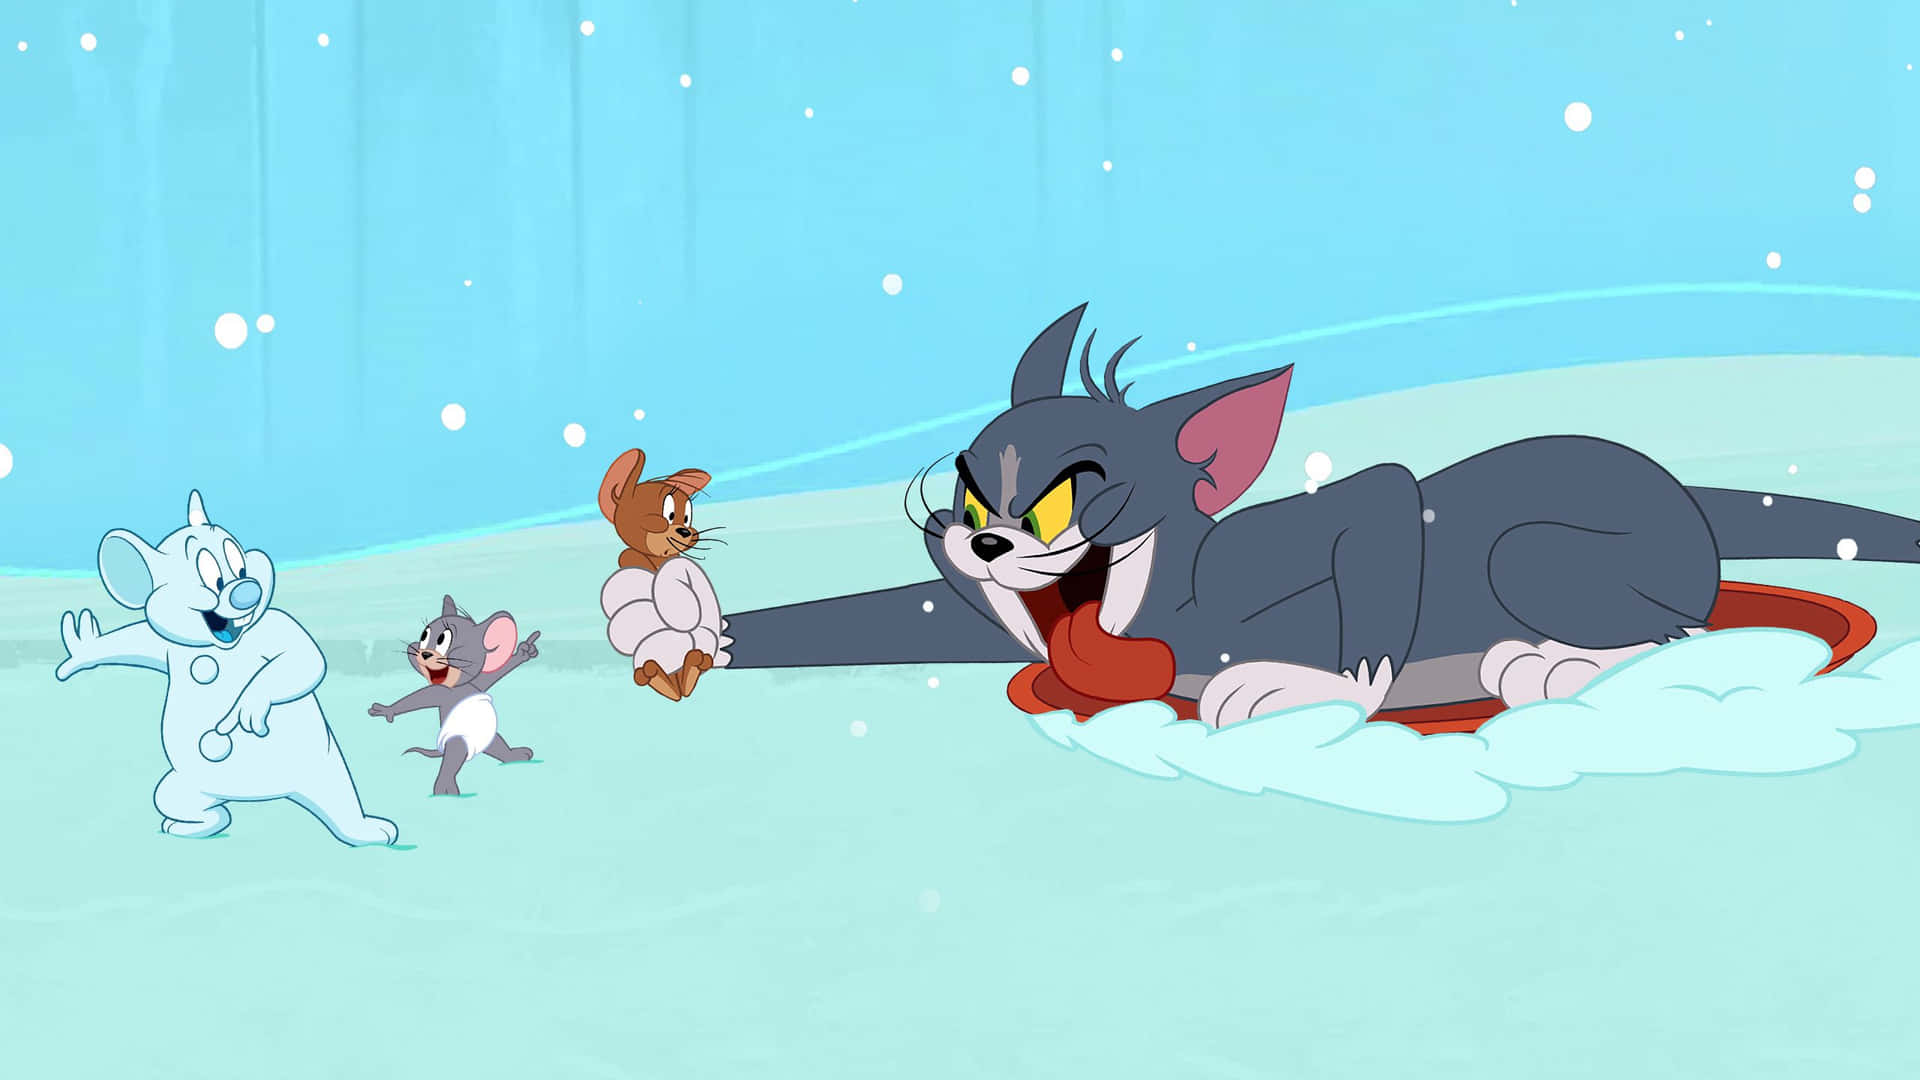 Tom and Jerry chase each other in a never ending game of tag